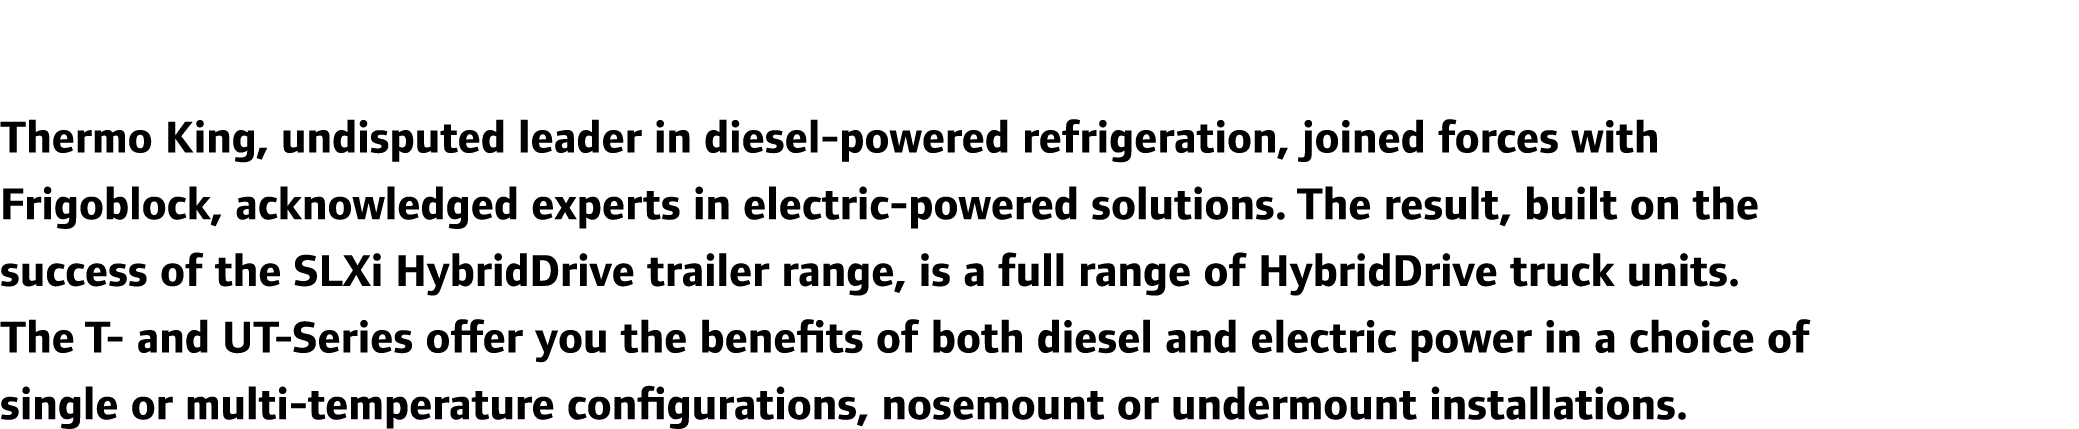 Thermo King, undisputed leader in diesel-powered refrigeration, joined forces with Frigoblock, acknowledged experts i...